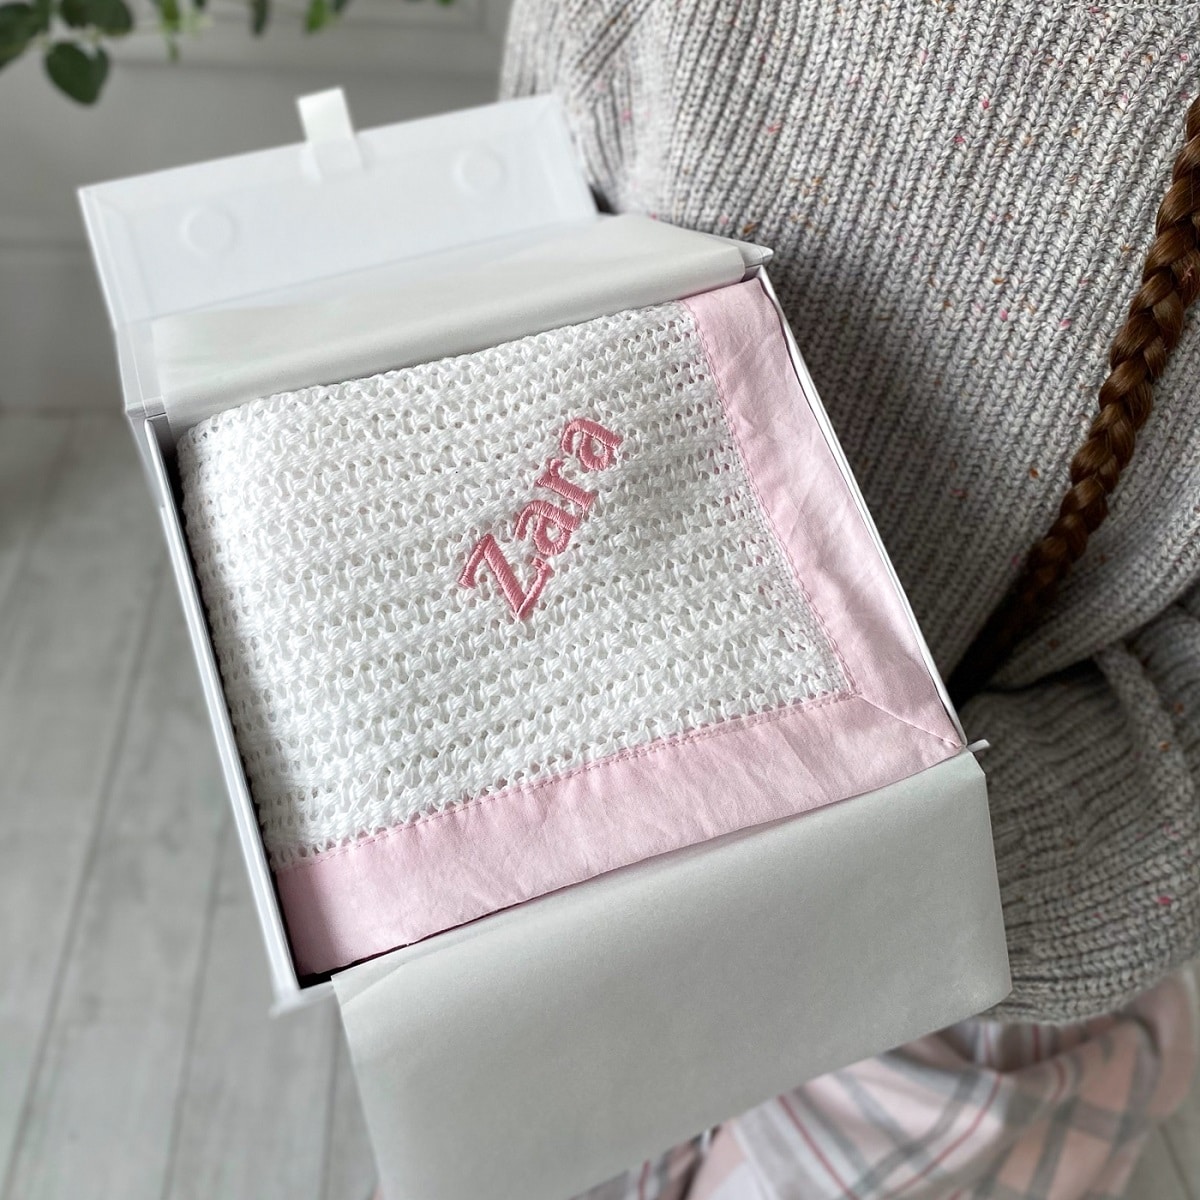 Ziggle personalised white cellular baby blanket with pink trim